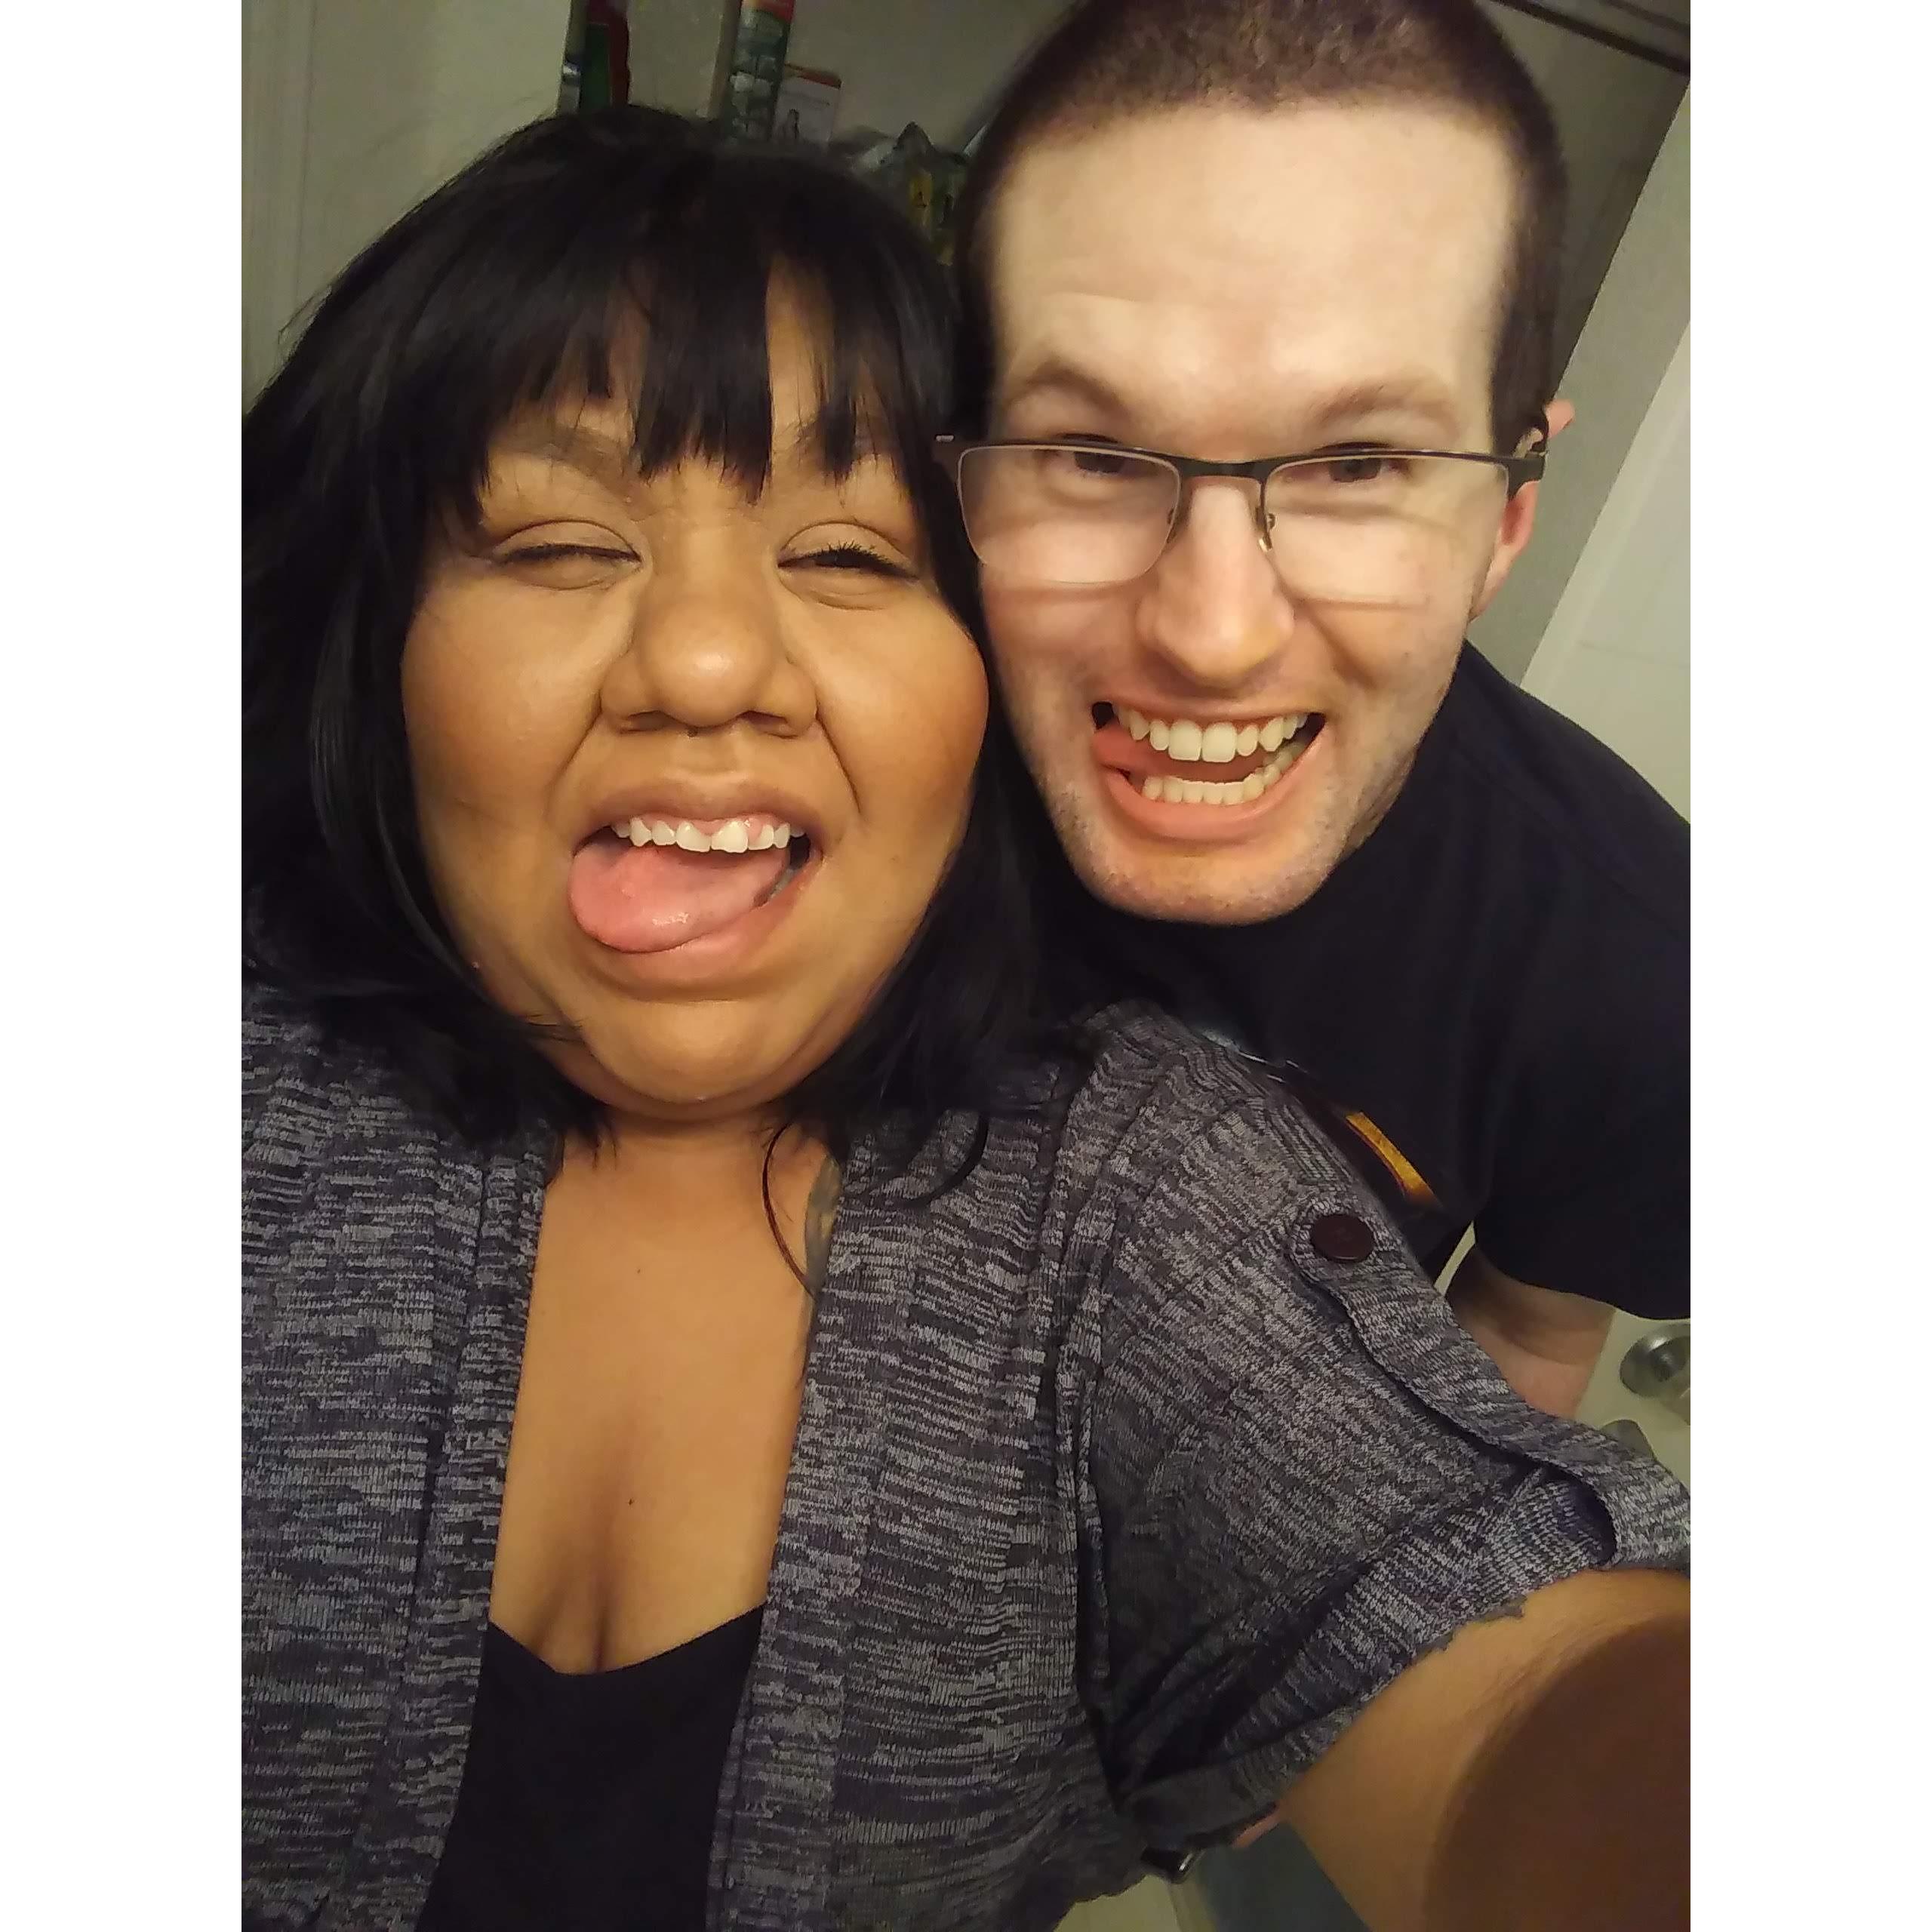 Our 1st pic as an official couple. We got together Aug. 3rd, 2019.